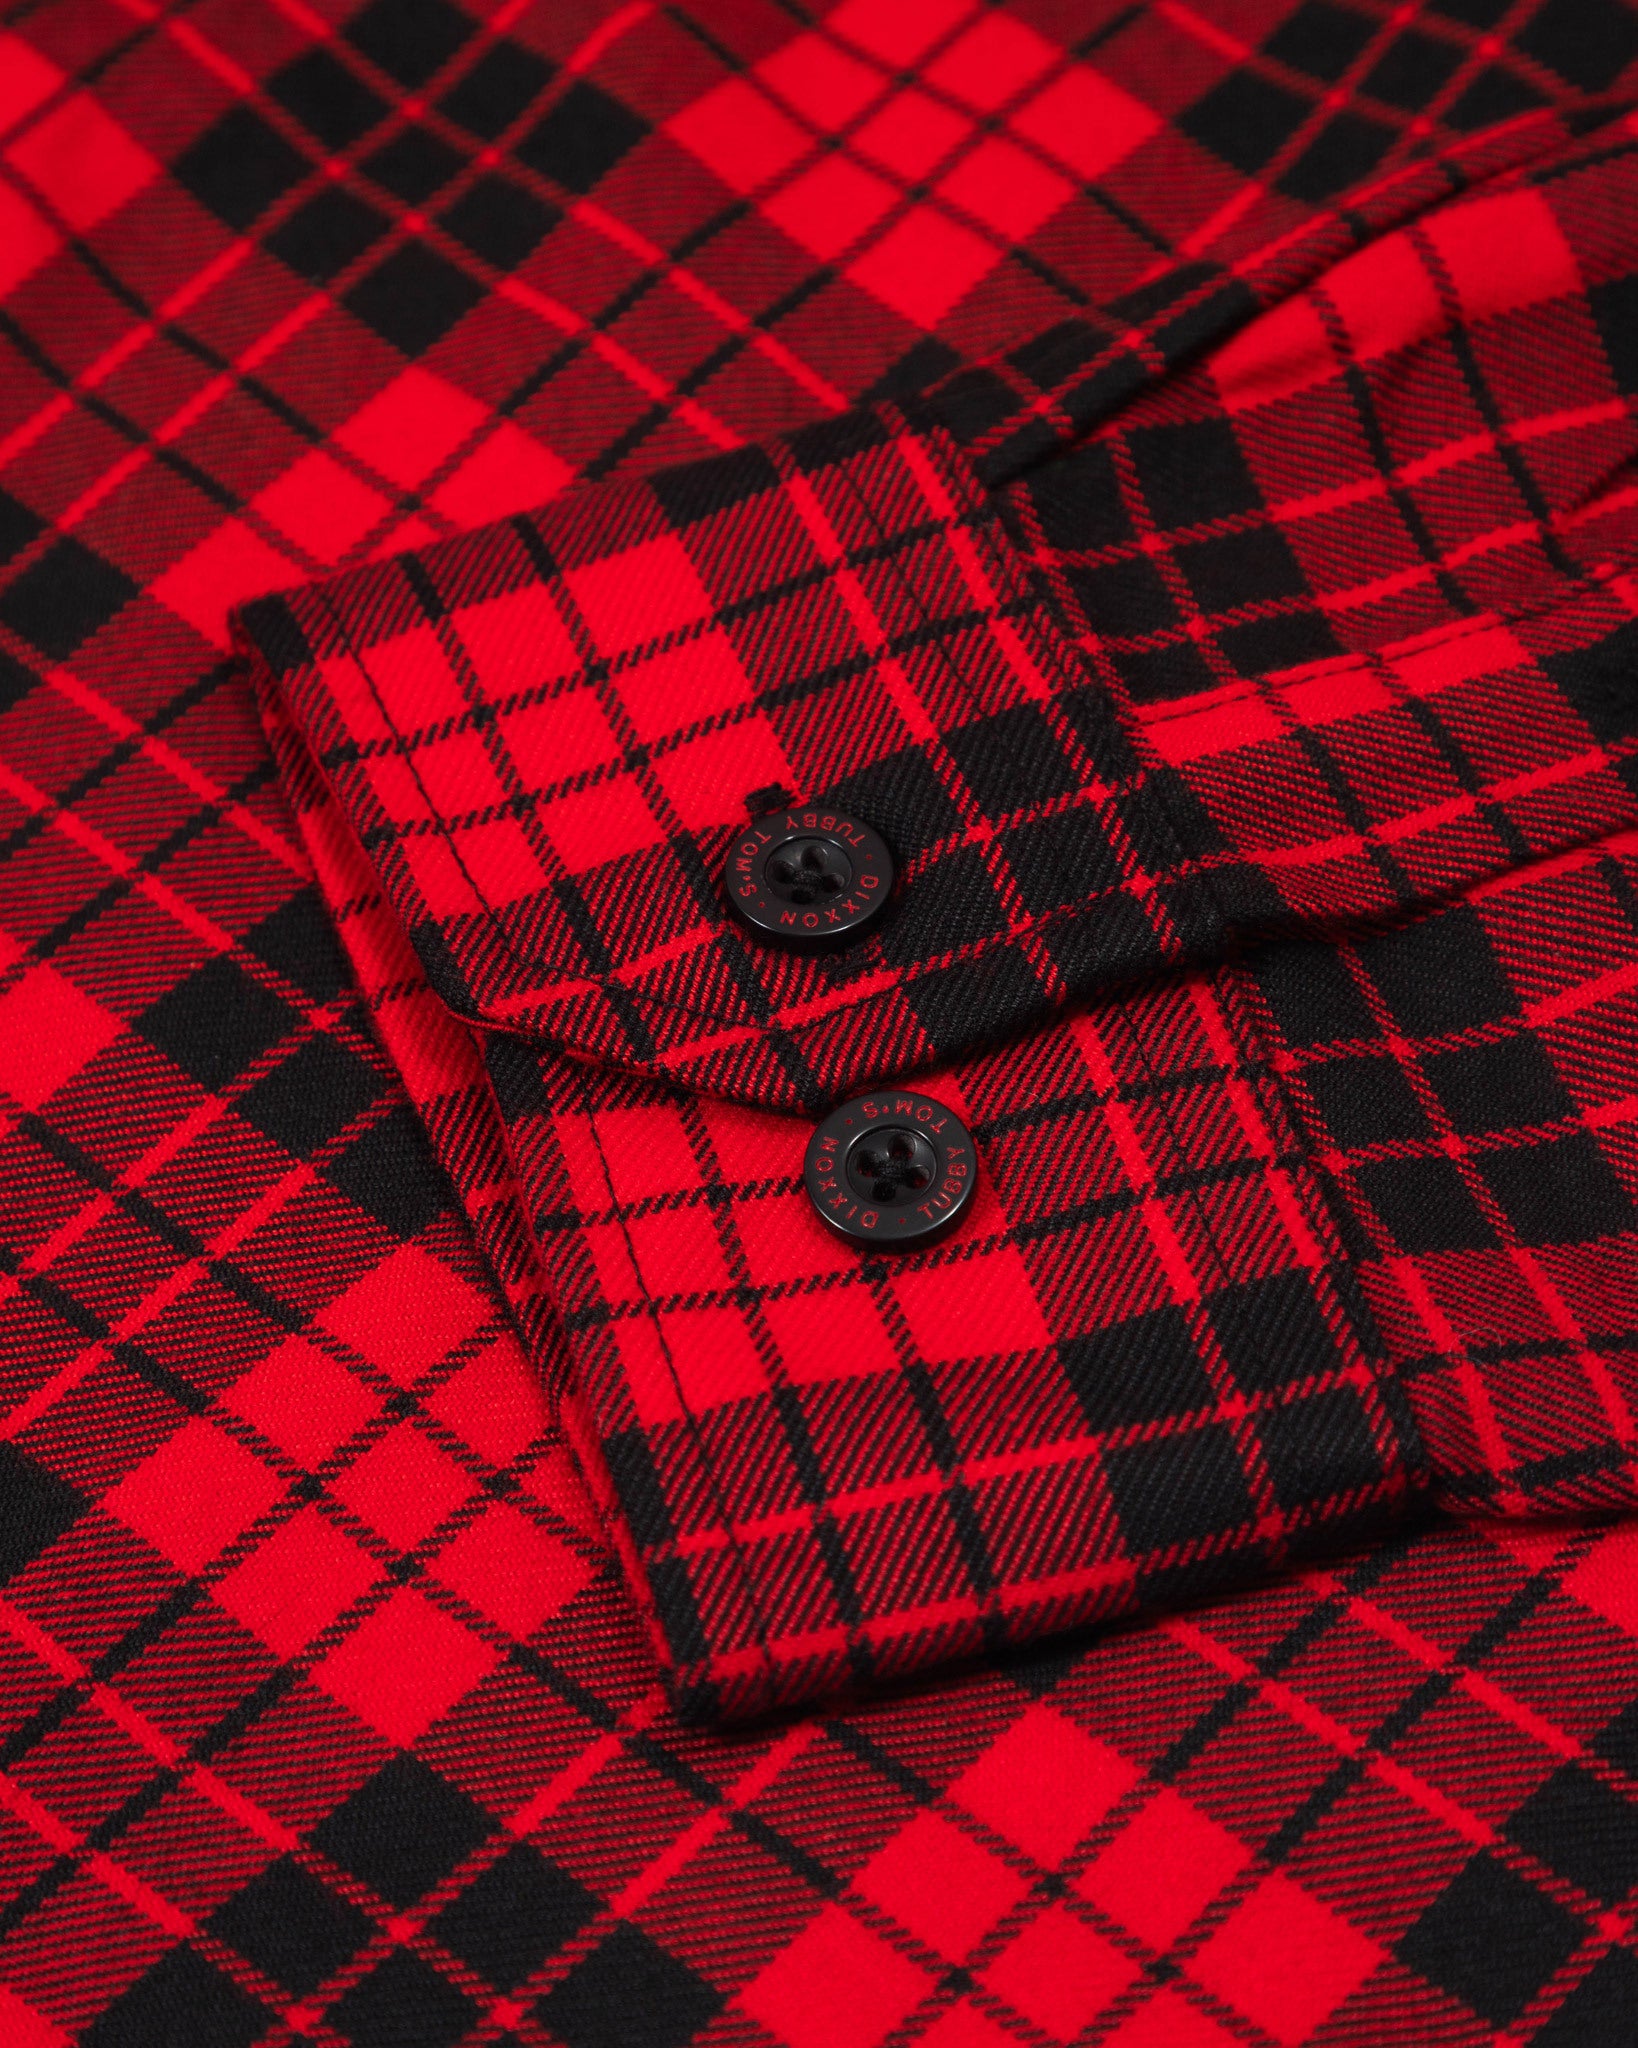 Tubby Tom's Flannel - Dixxon Flannel Co.